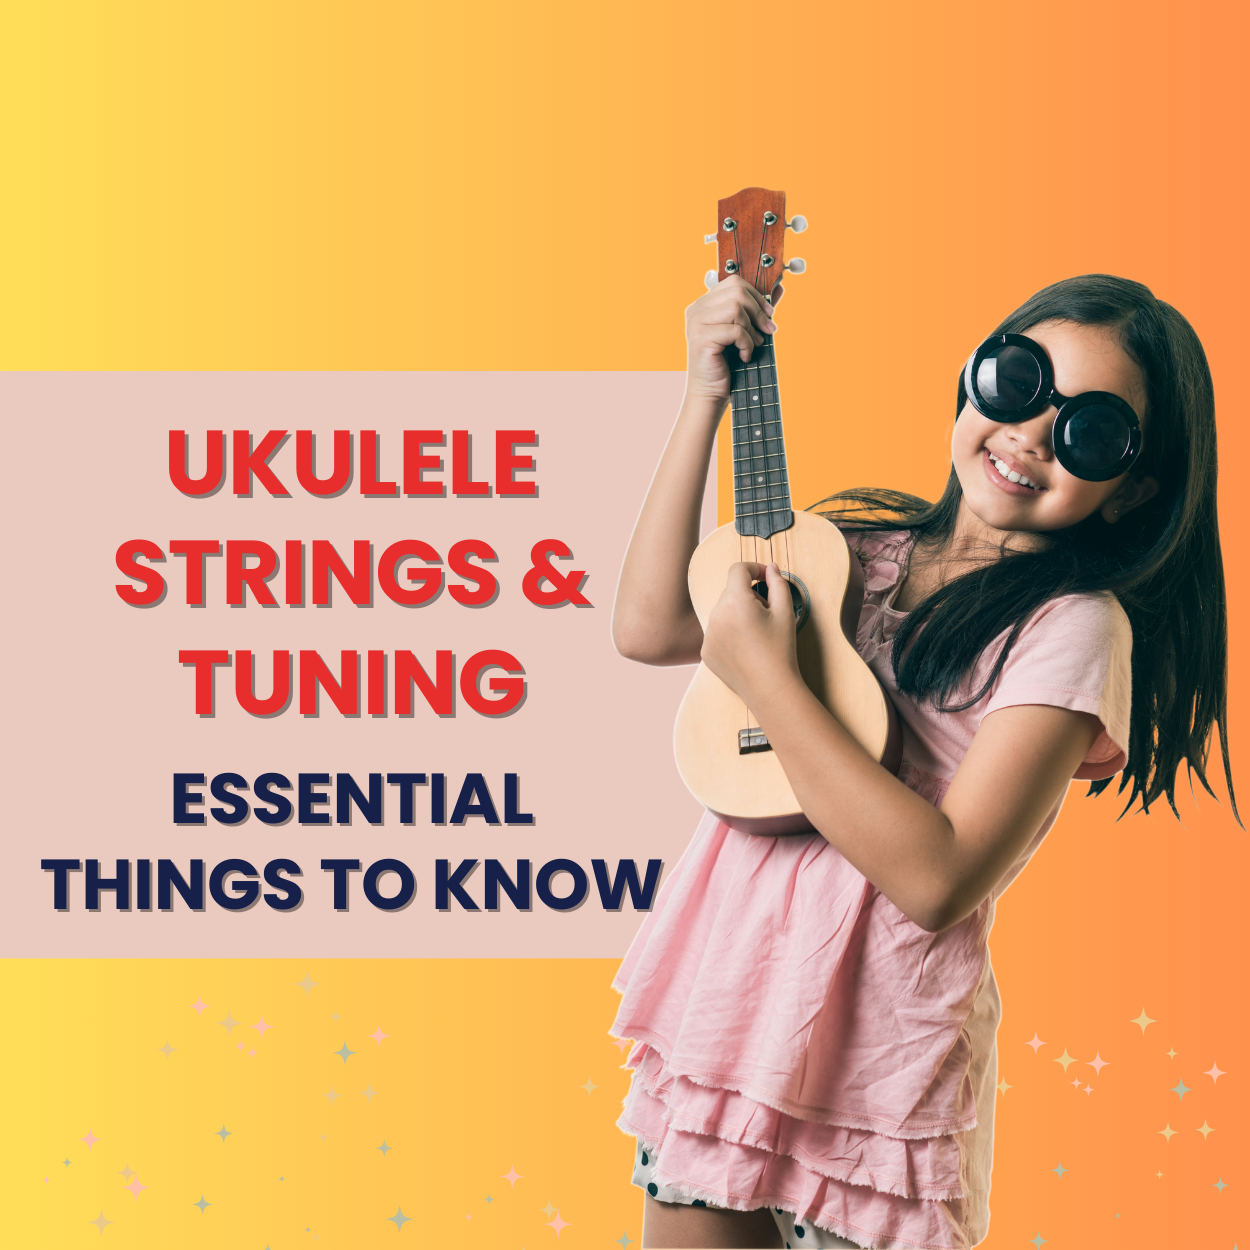 Ukulele Strings & Tuning - Essential Things to Know